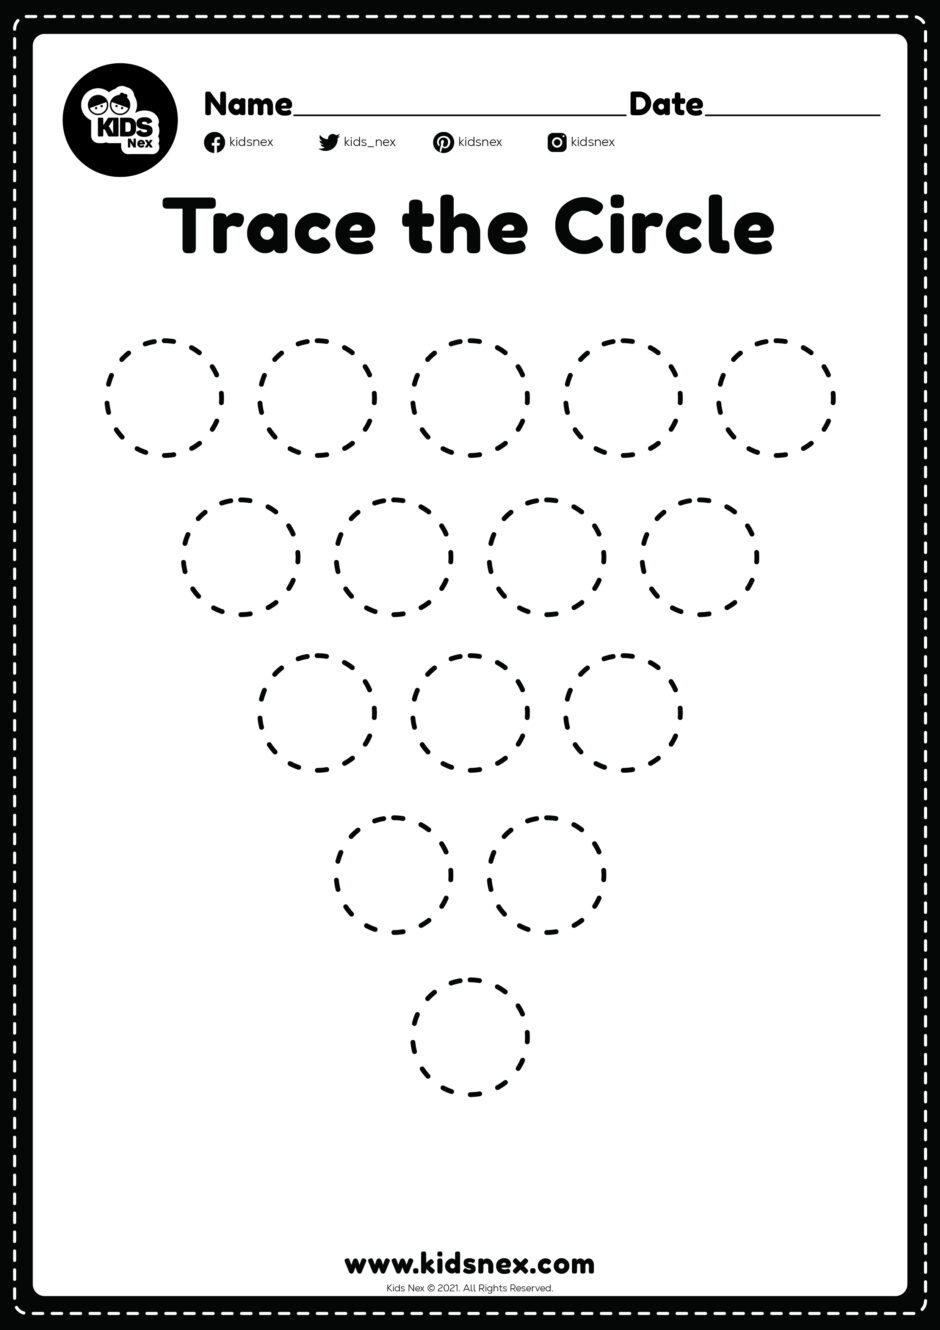 Circles tracing worksheet for preschool and kindergarten school kids for a educational learning activities in a free printable file format